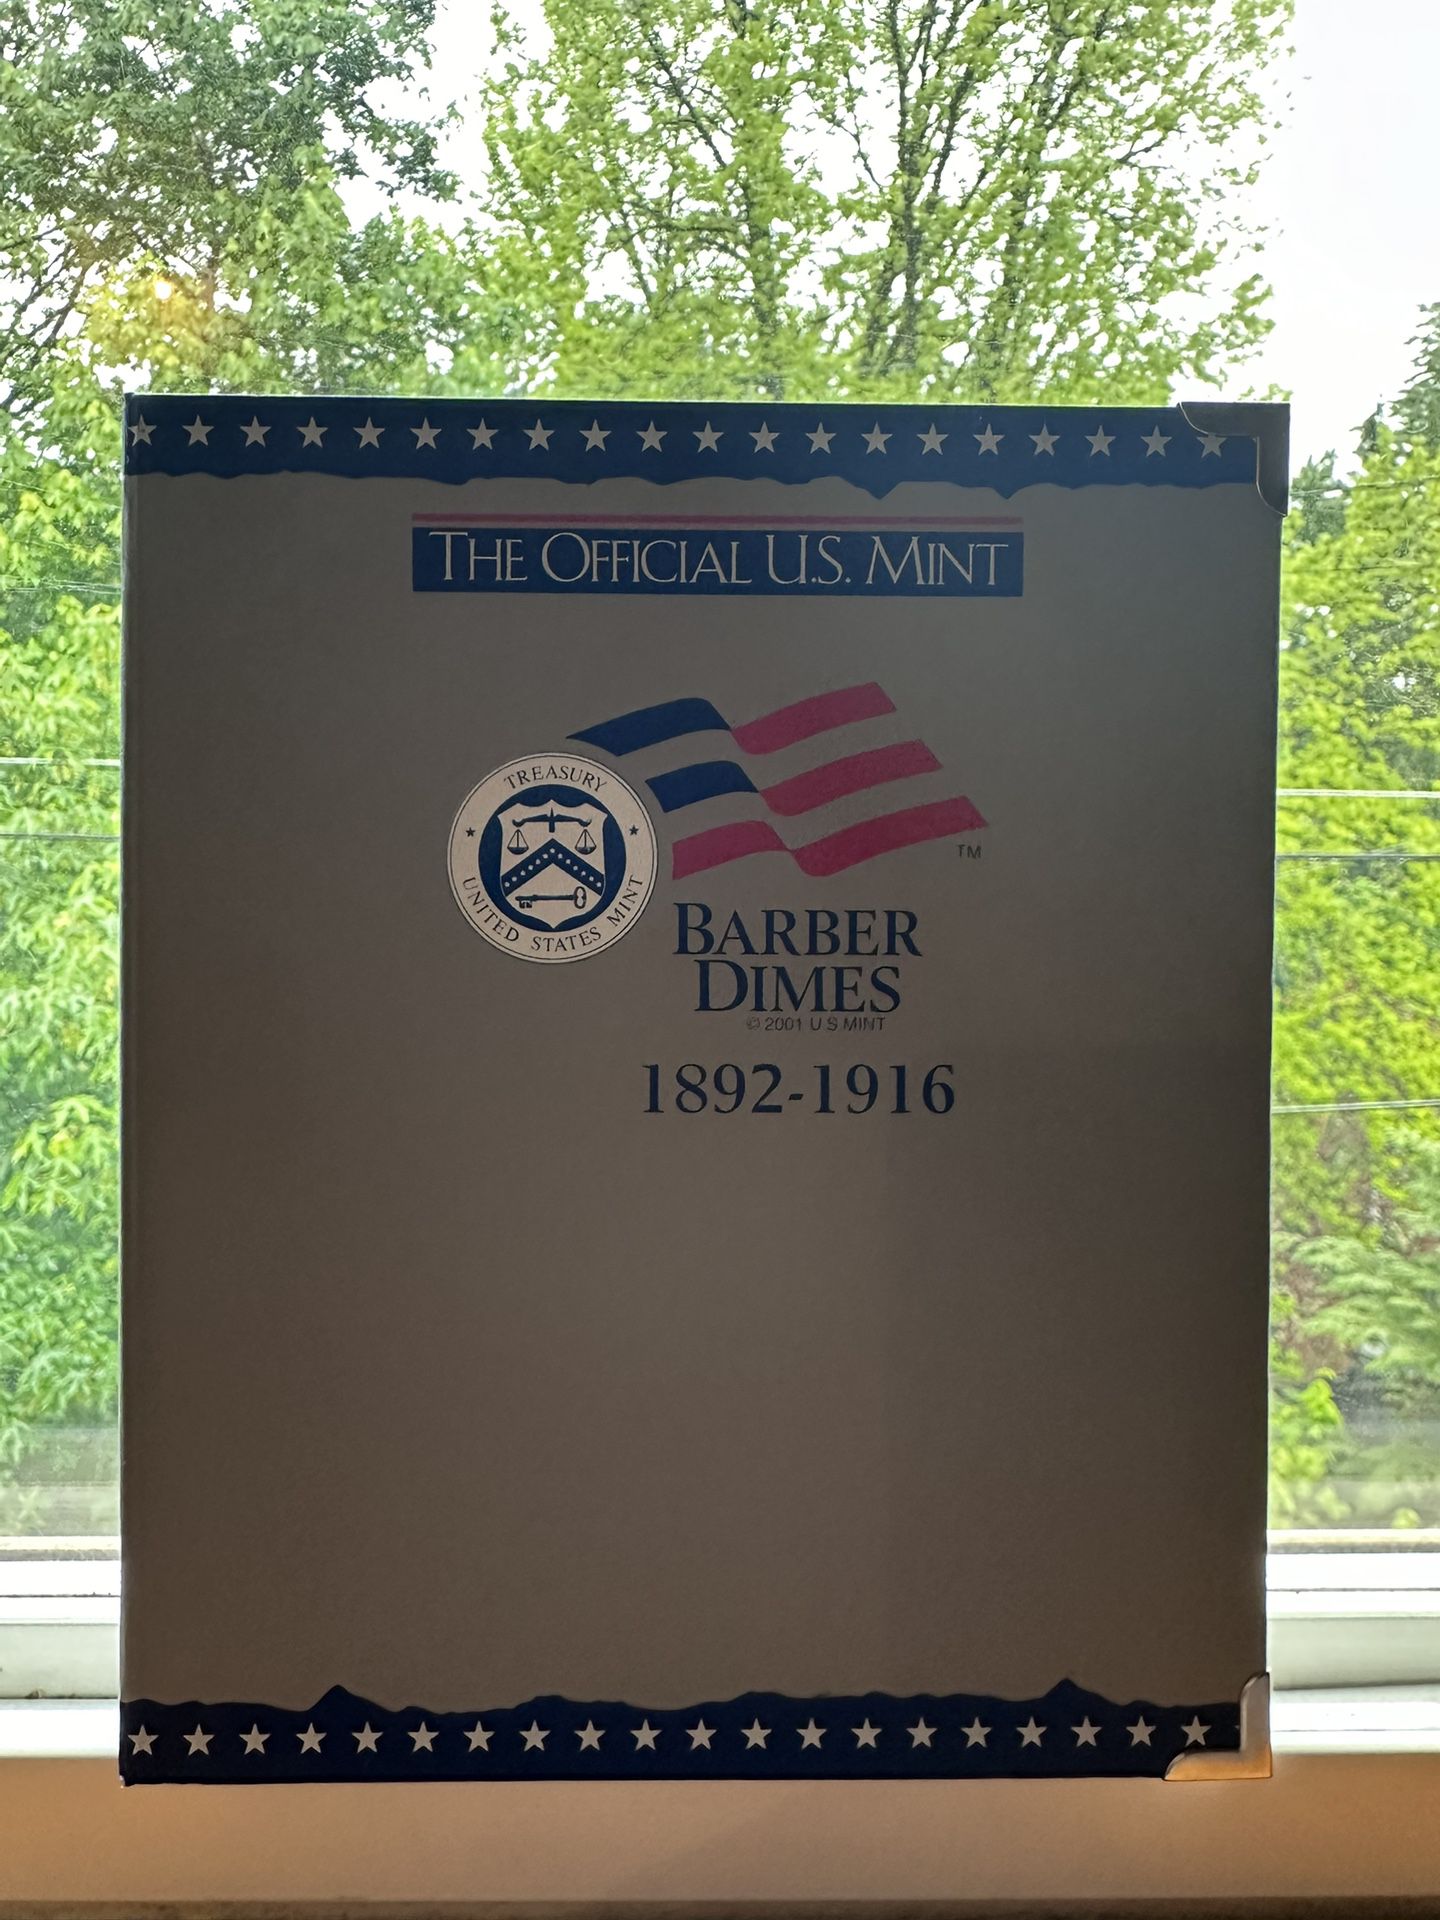 The Official U.S. Mint Barber Dimes Album 1(contact info removed)